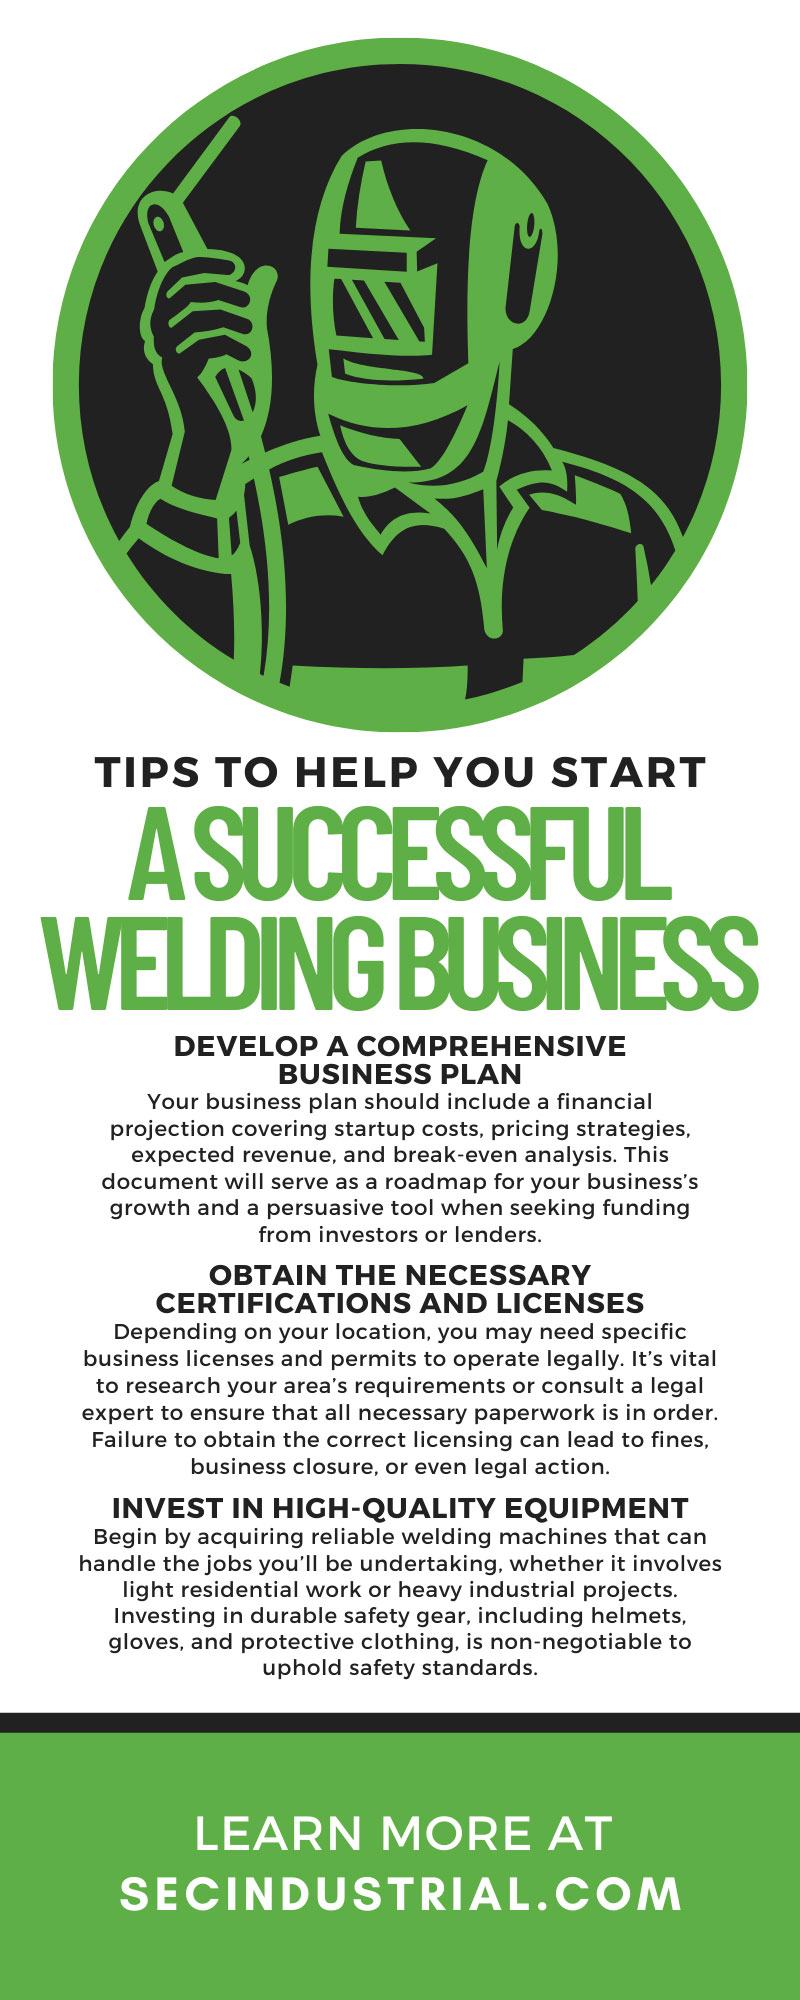 7 Tips To Help You Start a Successful Welding Business